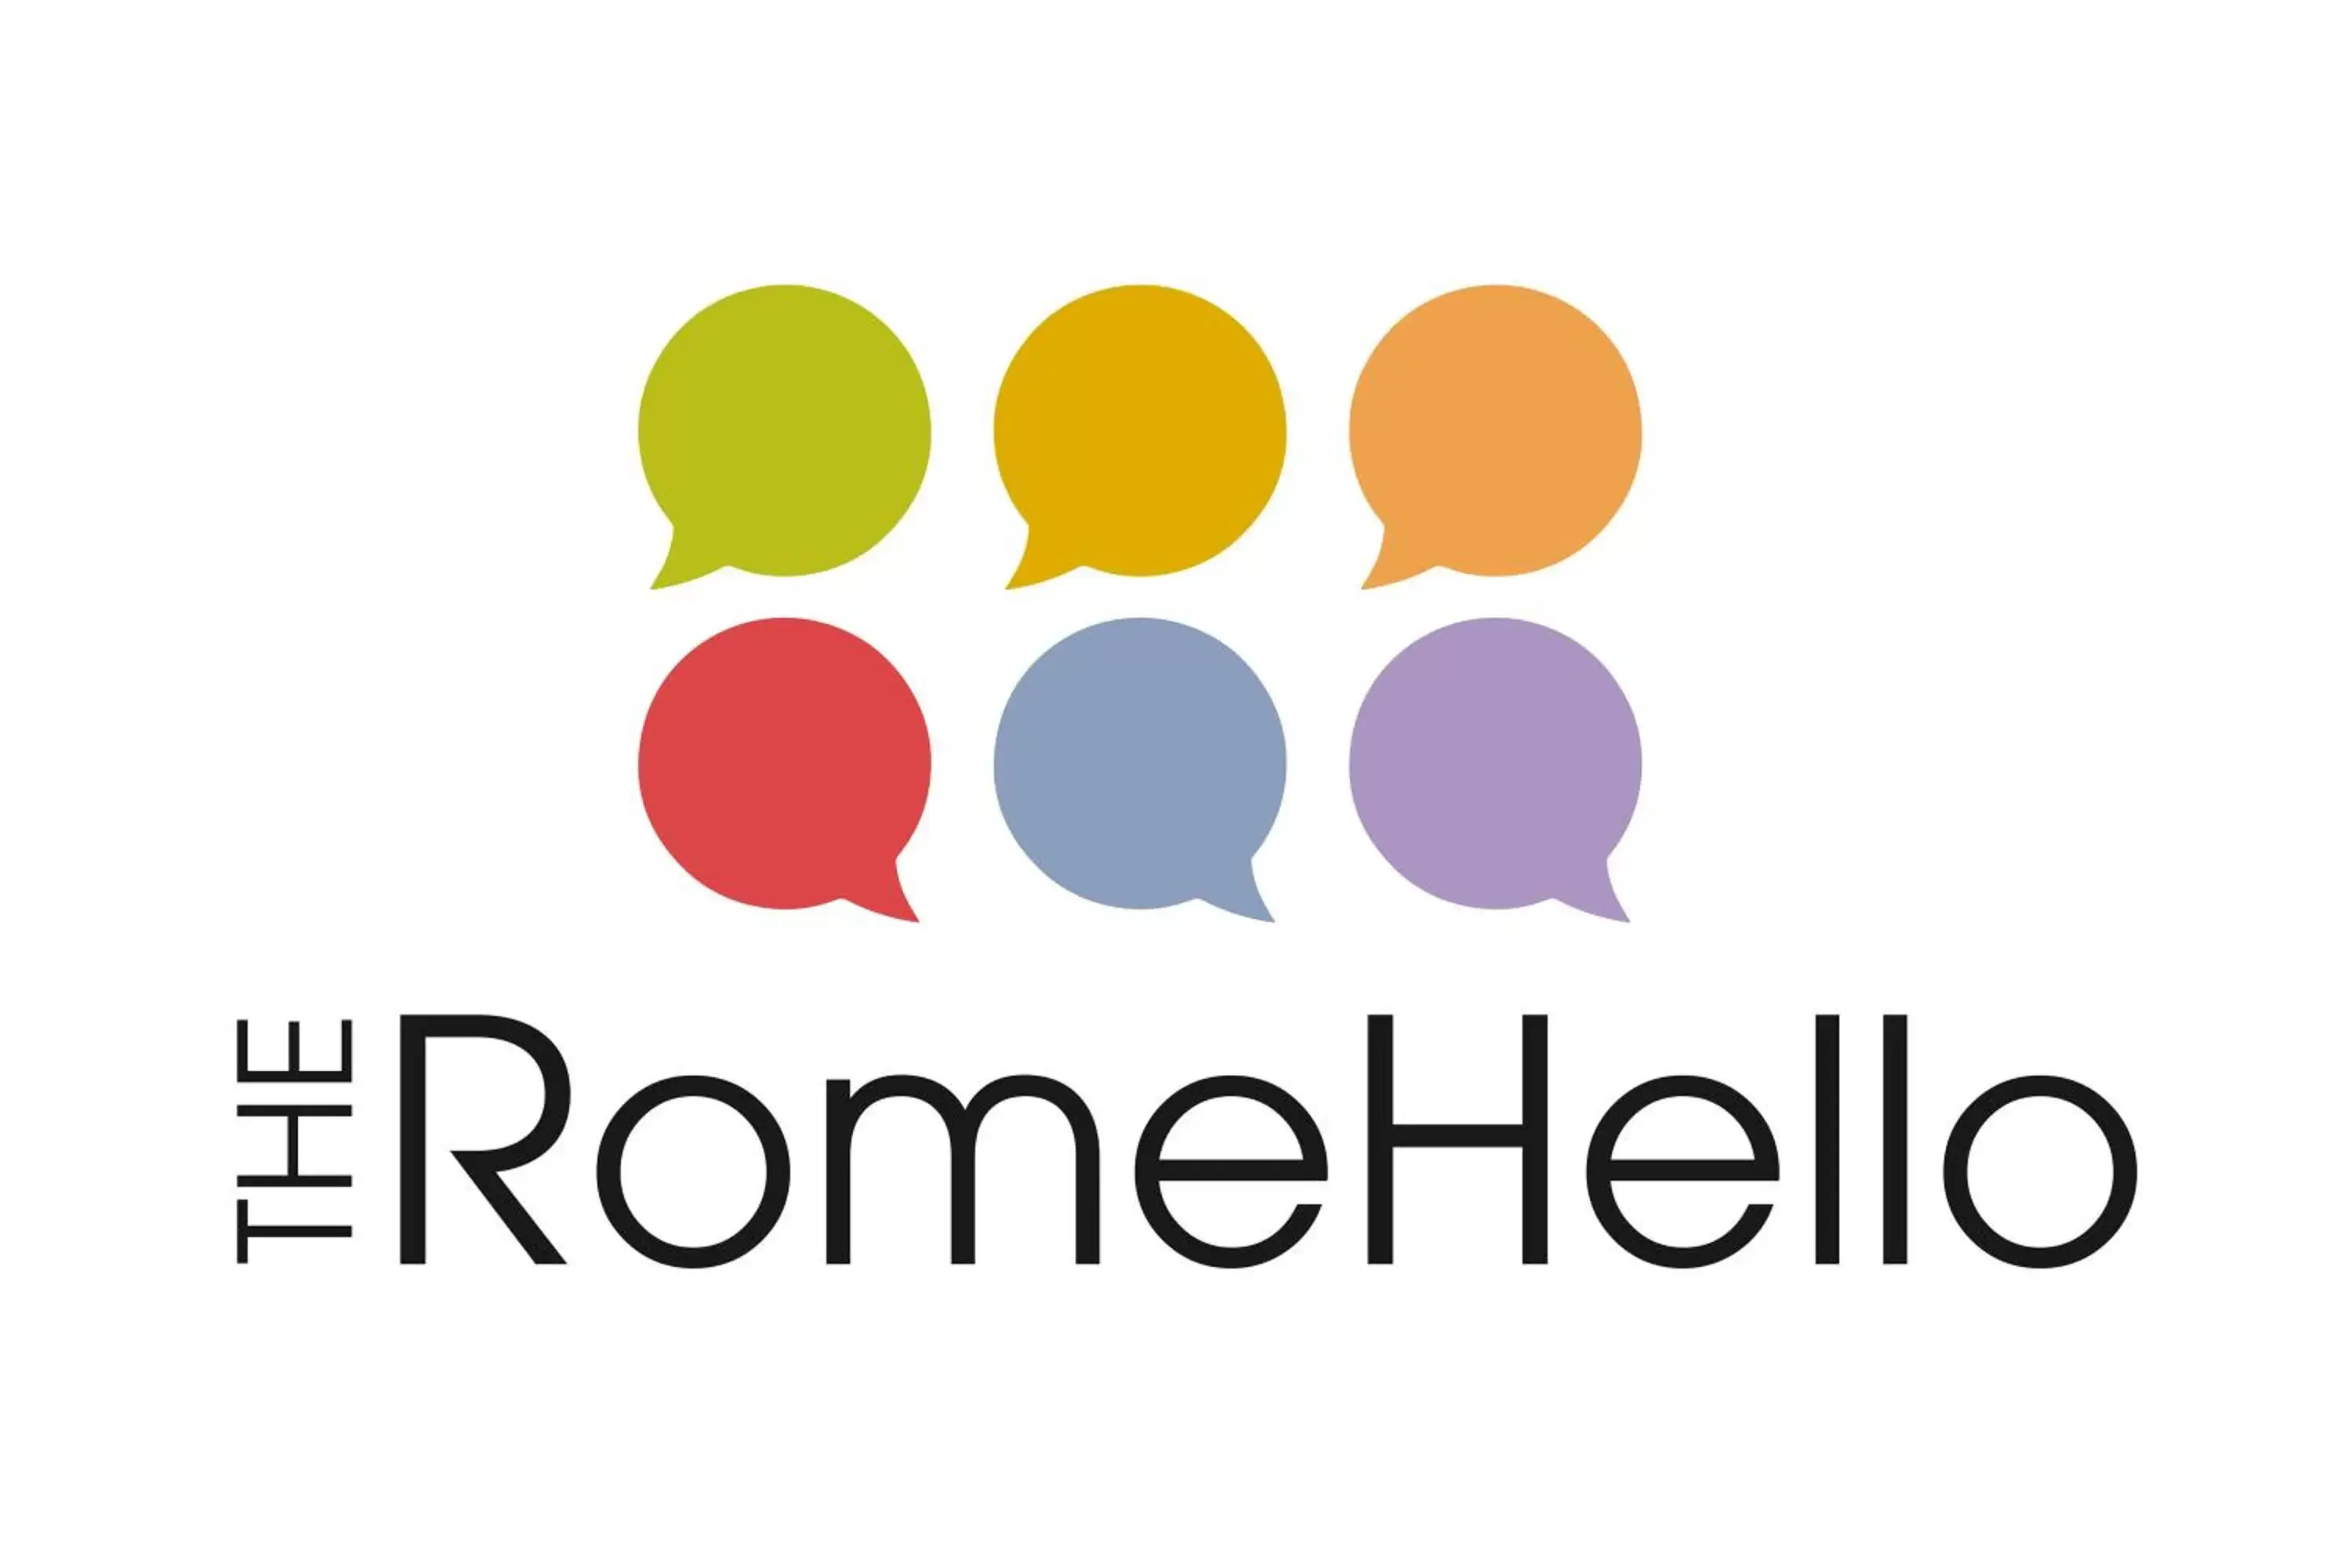 Property logo or sign in The RomeHello